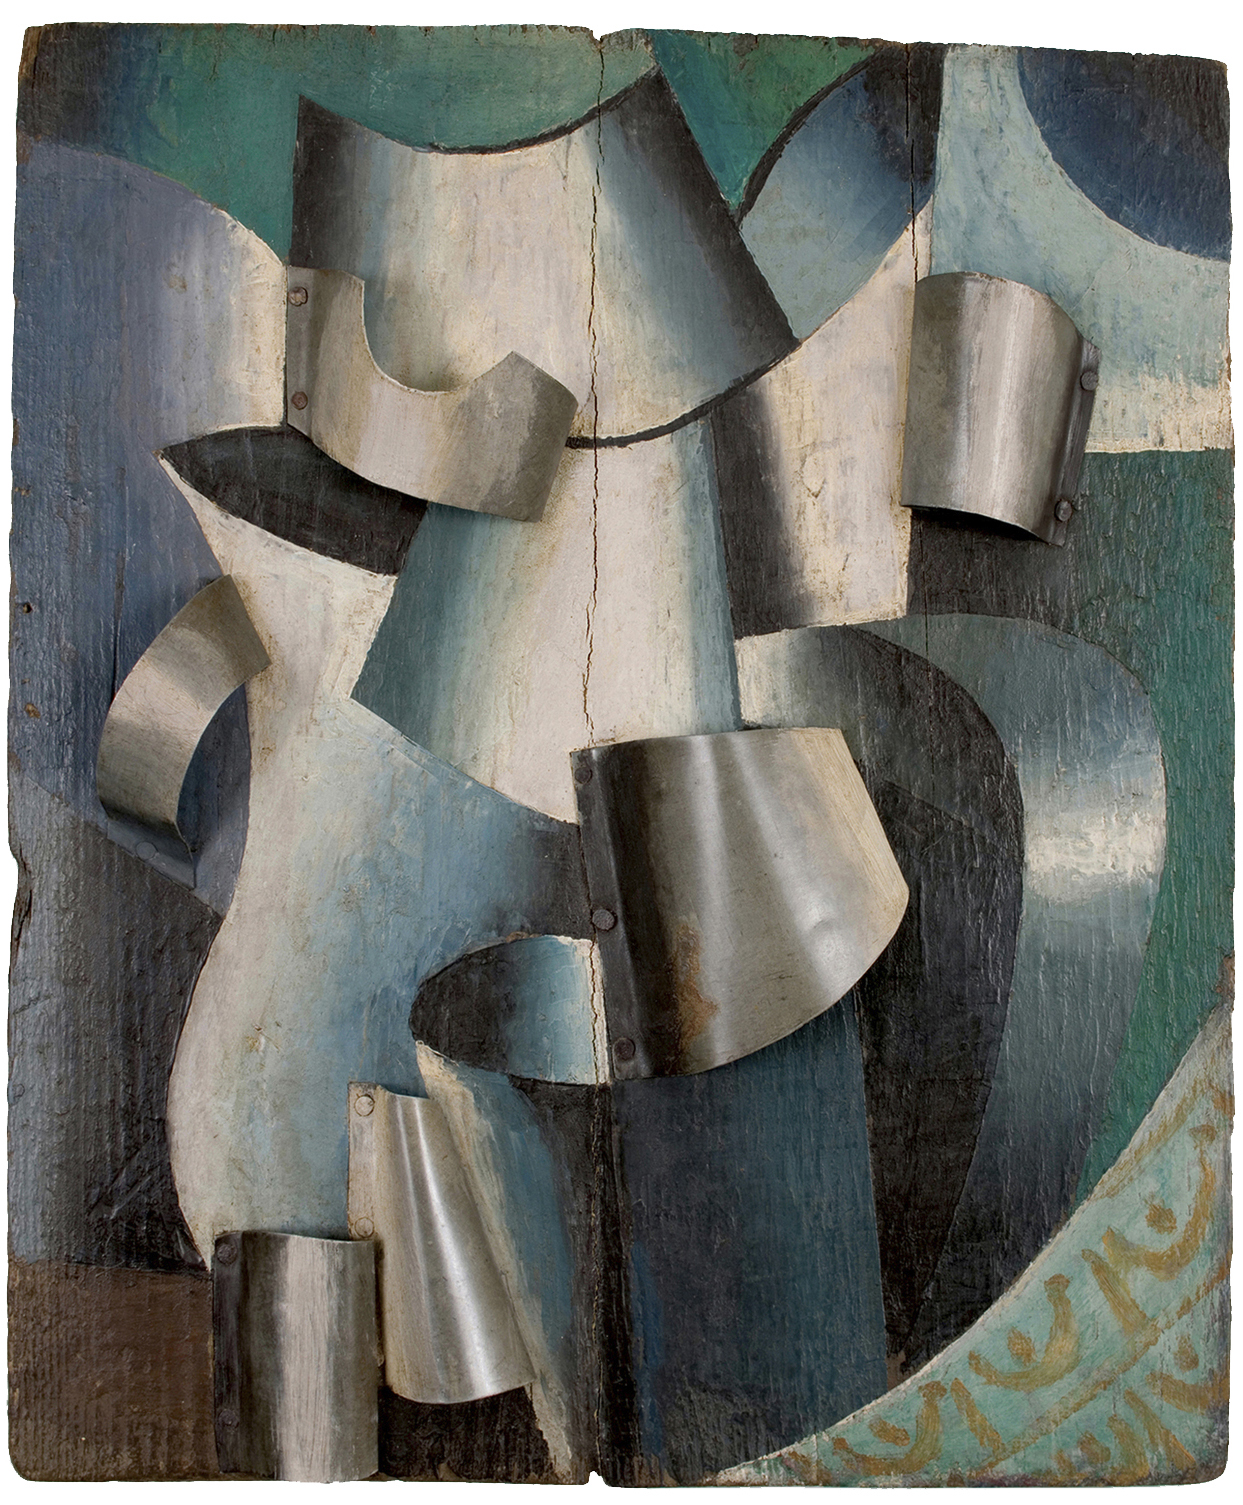  Unattributed. Unsigned. In the style of Lyubov Popova.&nbsp;Inscription on reverse translates “Water on a Table”&nbsp; Oil and metal on wood, 39 x 33 cm. 